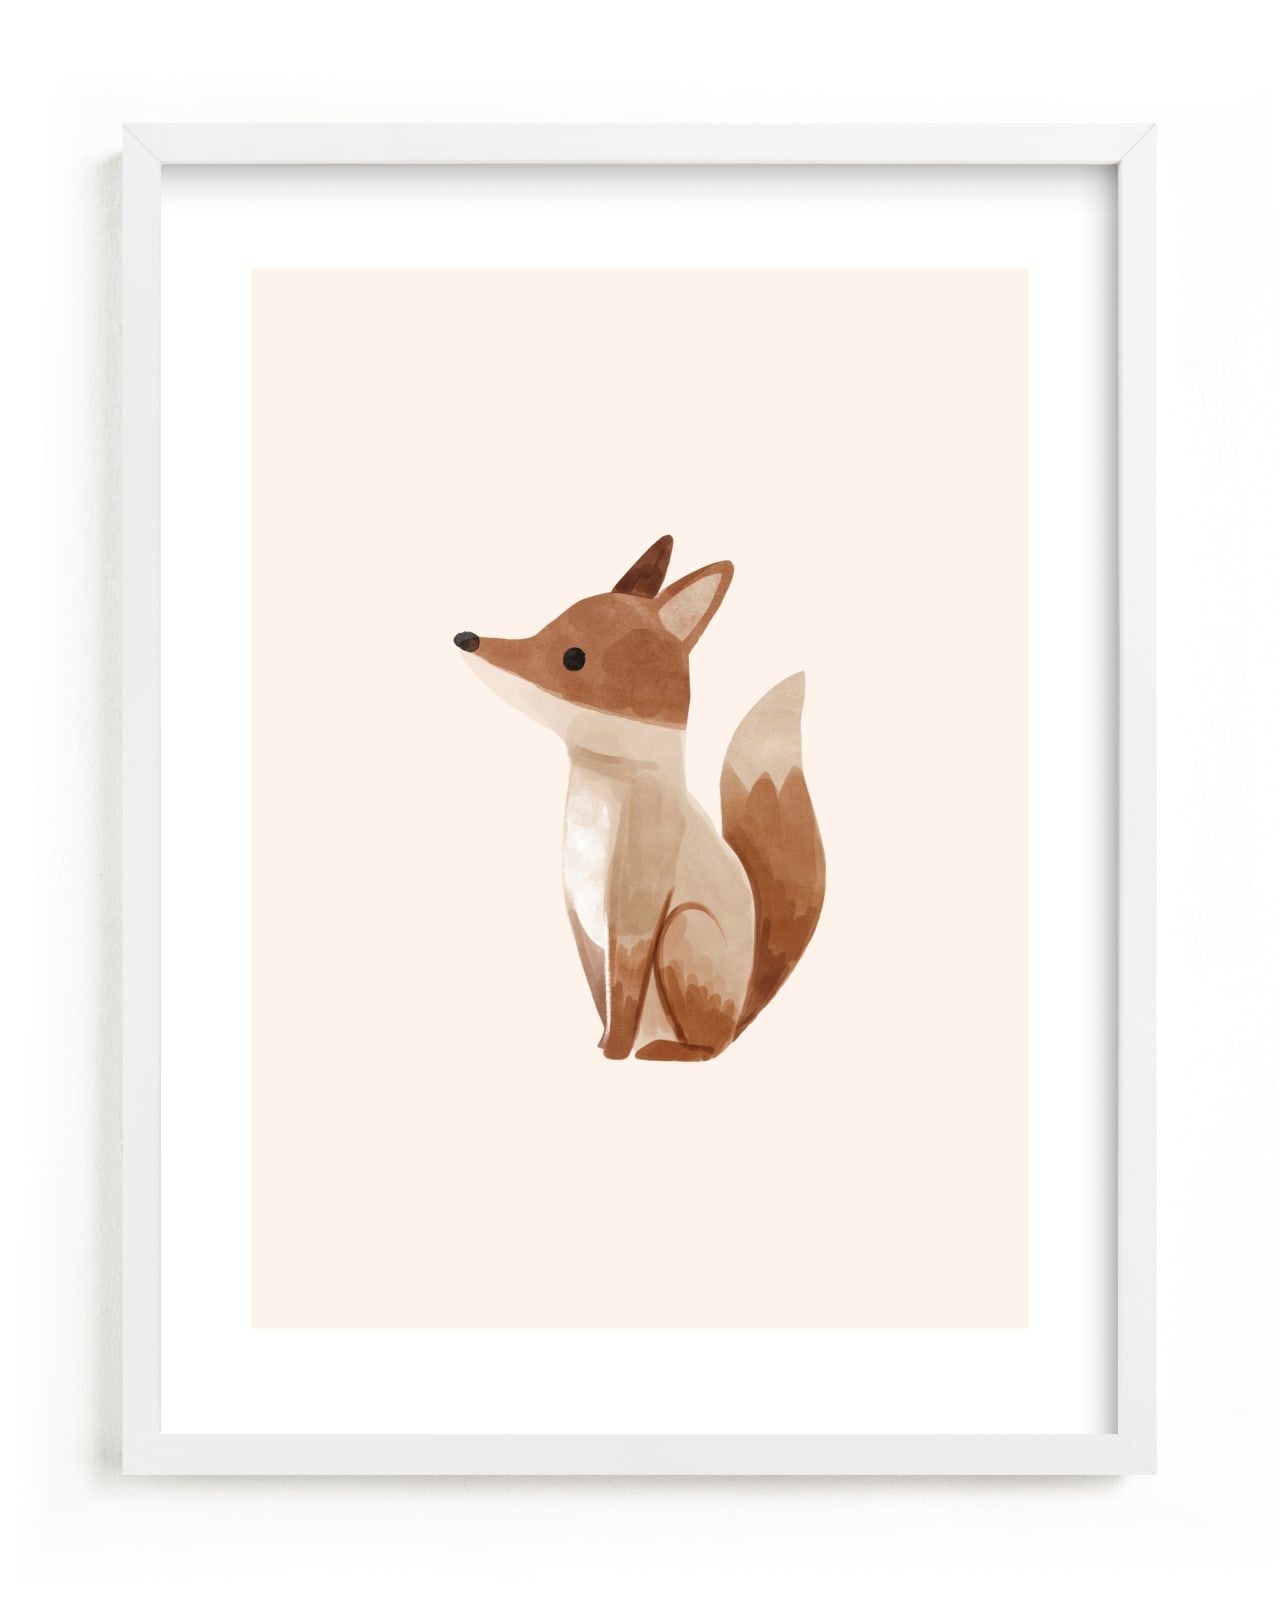 "Baby Fox" - Painting Limited Edition Art Print by Vivian Yiwing. | Minted